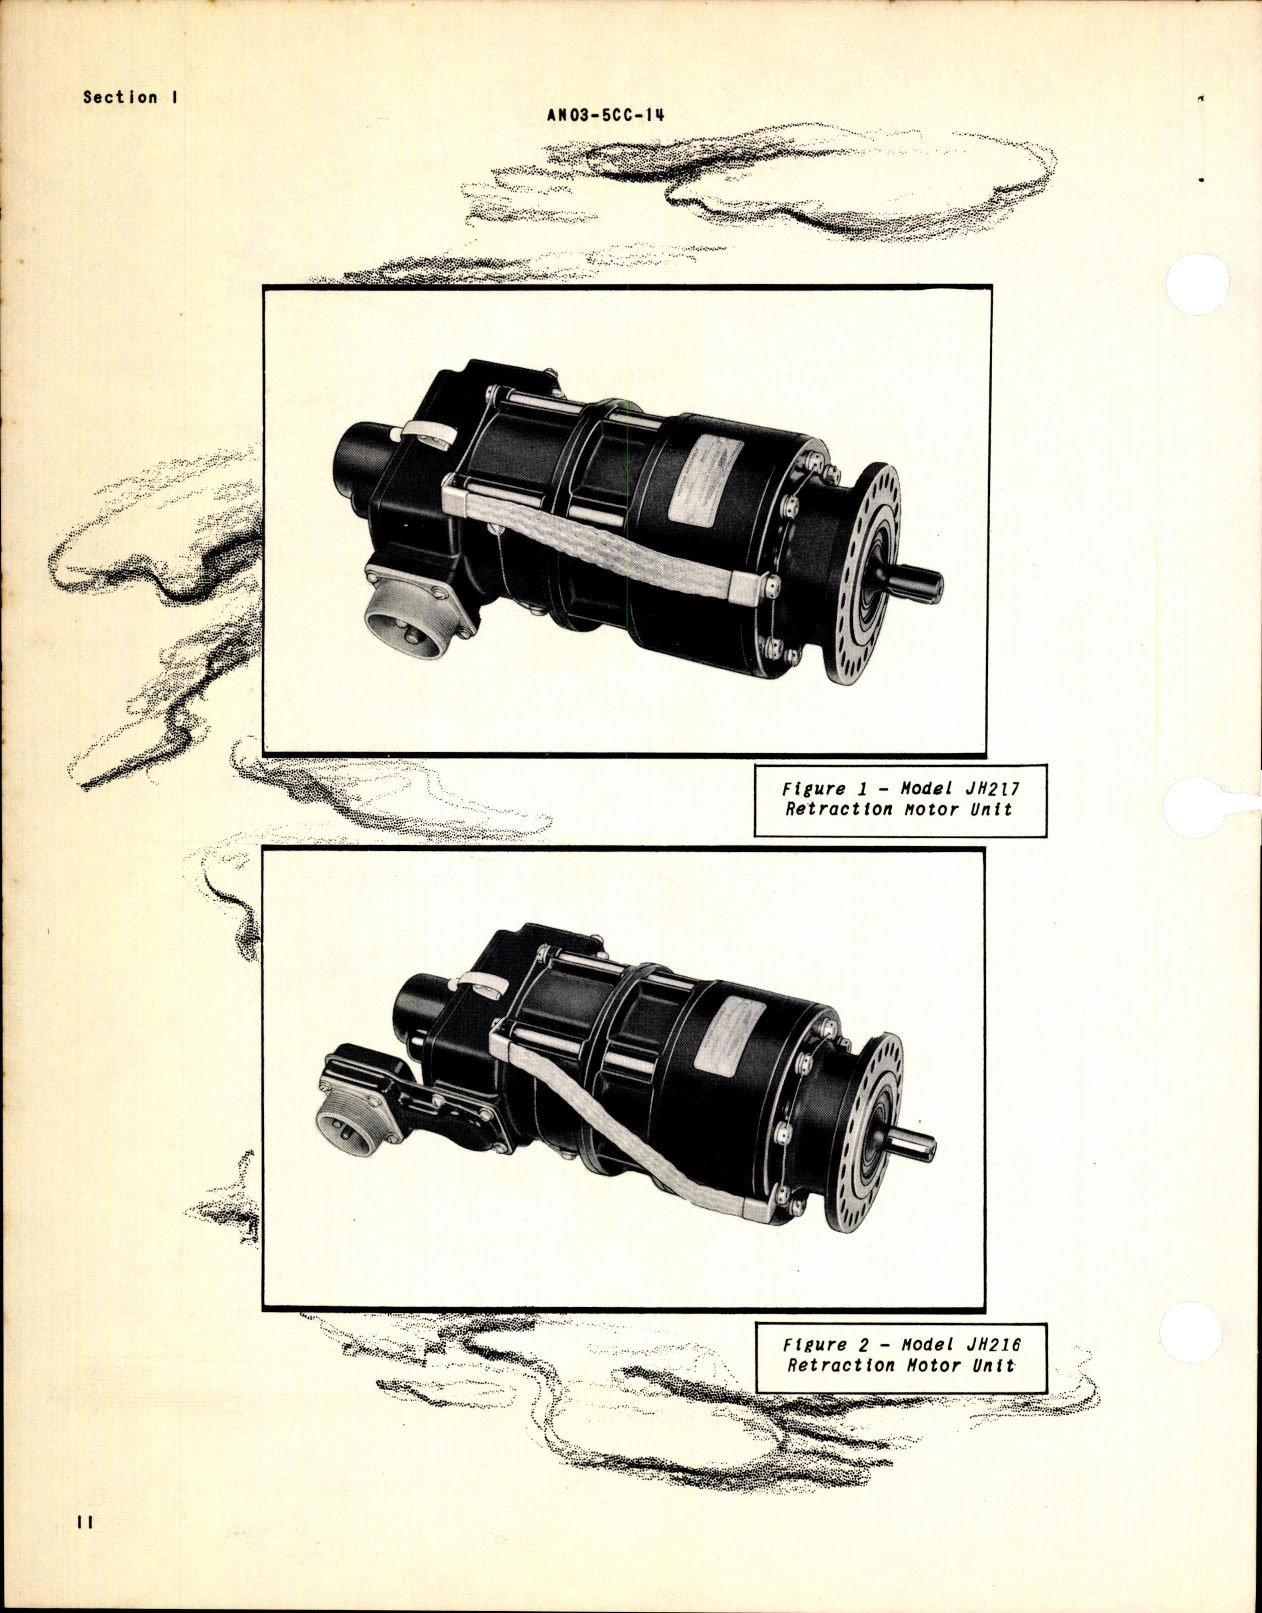 Sample page 4 from AirCorps Library document: Operation, Service, & Overhaul Instructions w/ Parts Catalog for Retracting Motors Models JH216 and JH217